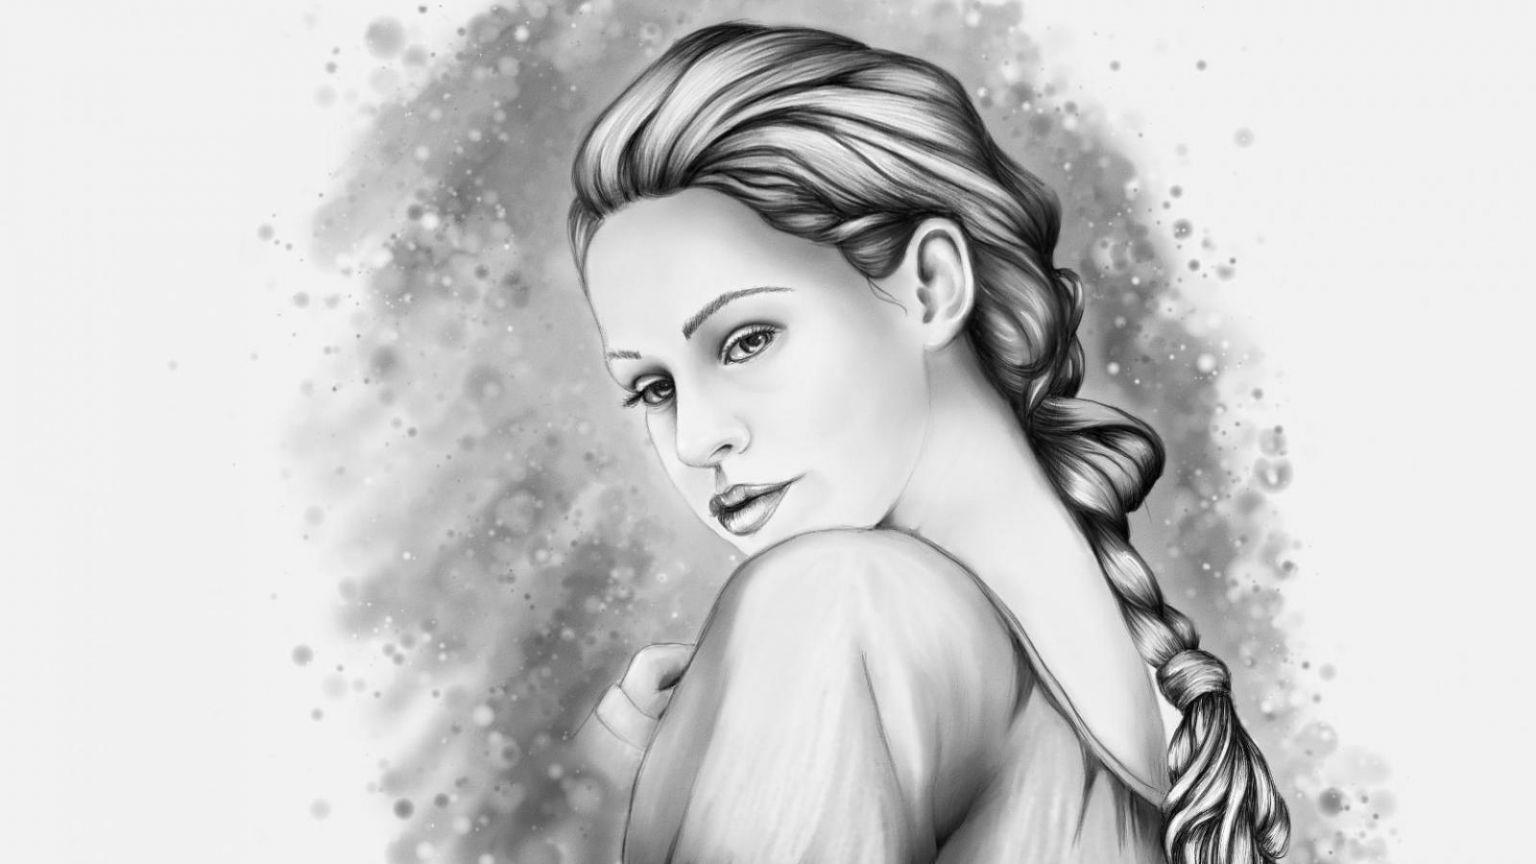 Pencil Drawing Wallpapers - Top Free Pencil Drawing Backgrounds ...